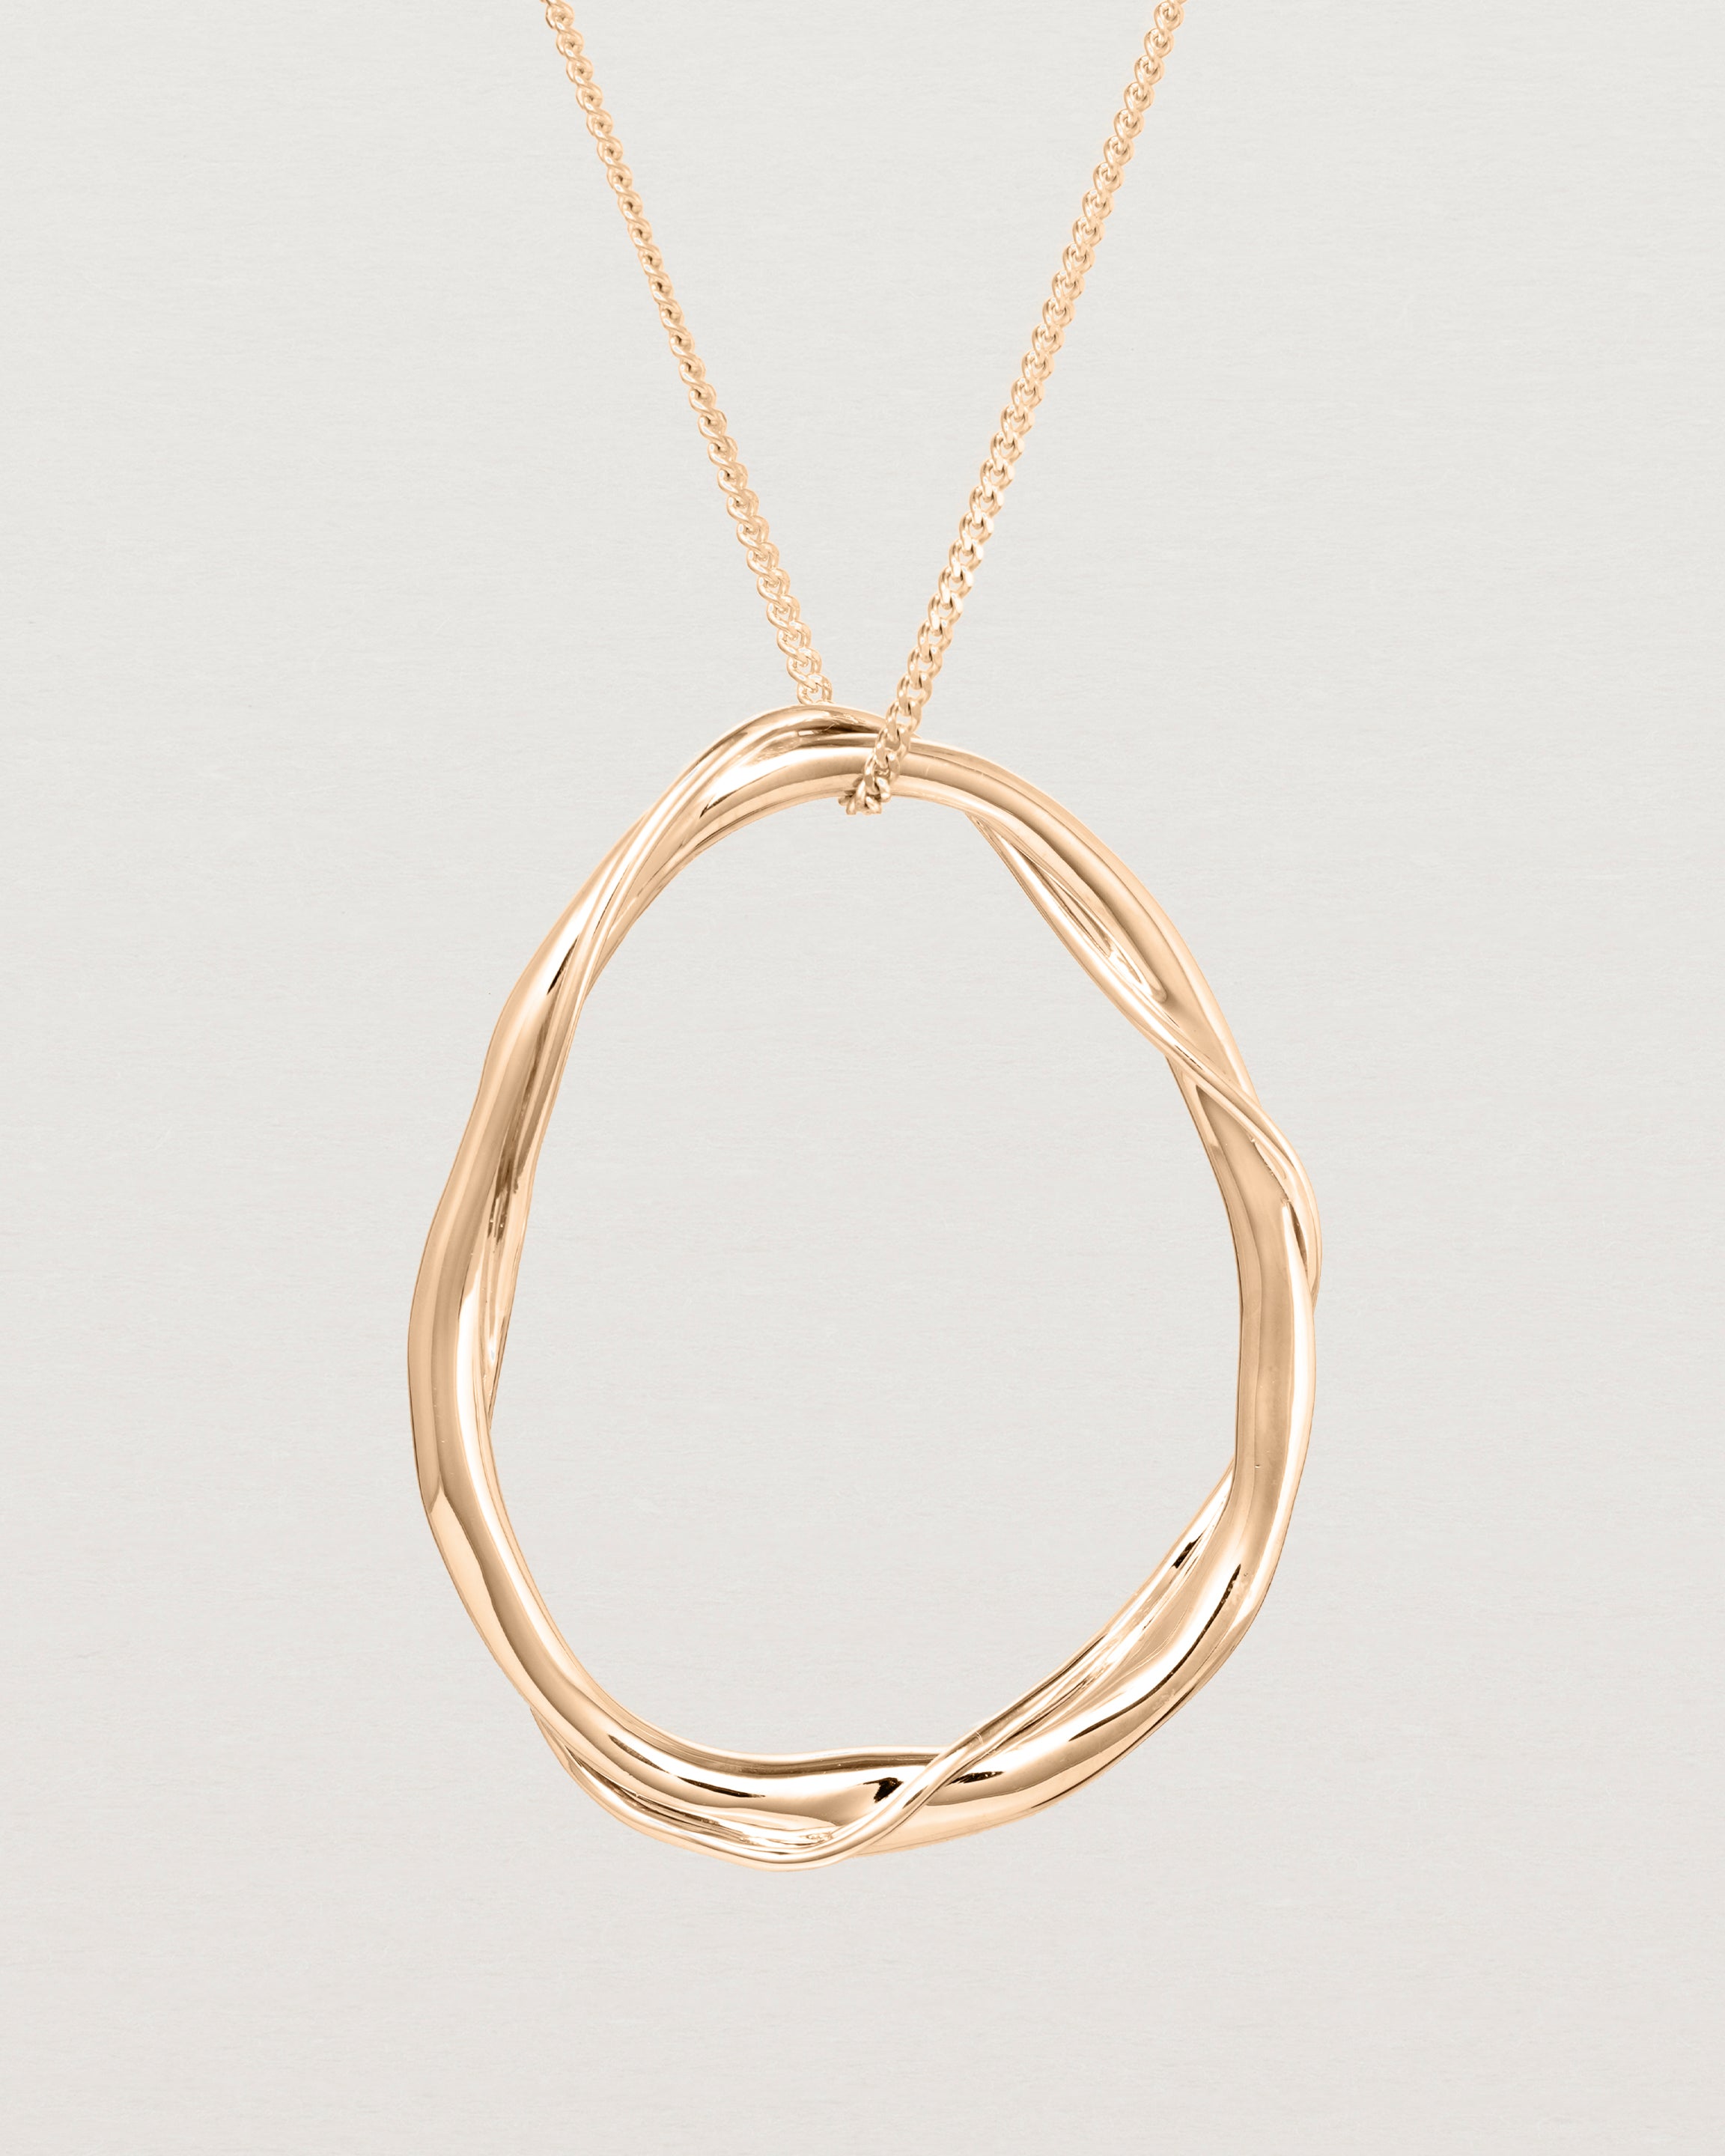 Close up view of the Dalí Necklace in rose gold.